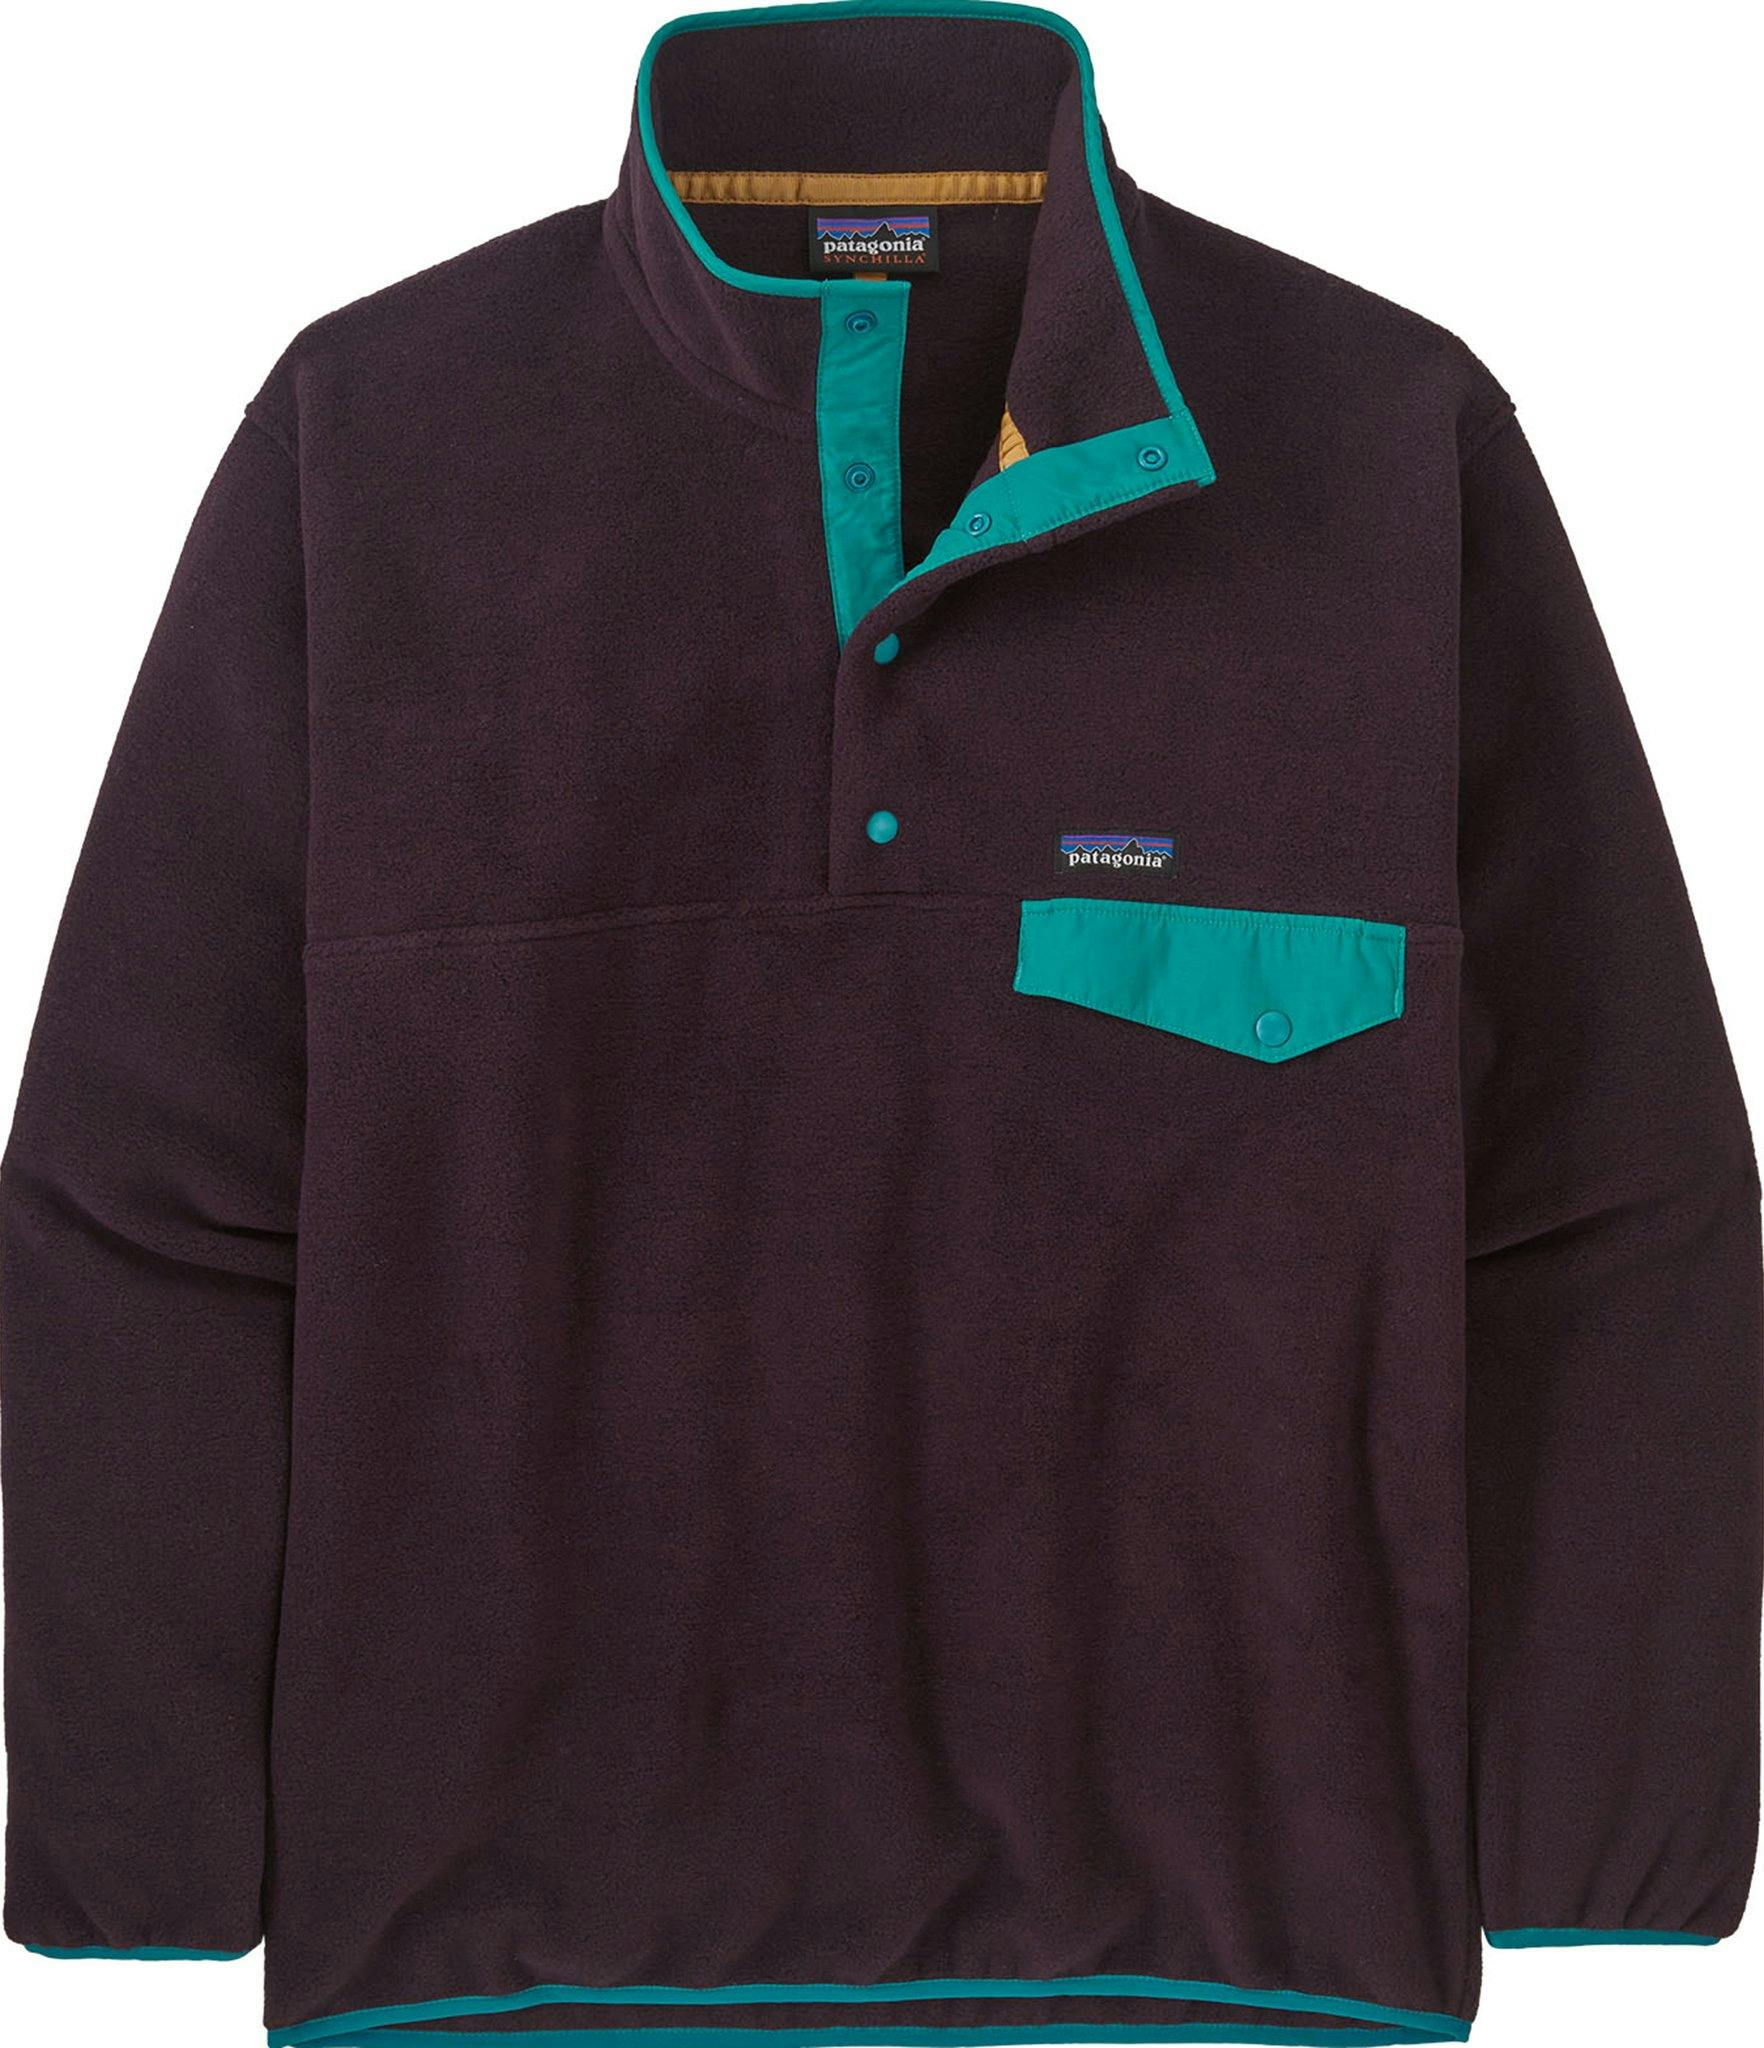 Product image for Synchilla Snap-T Fleece Pullover - Men's